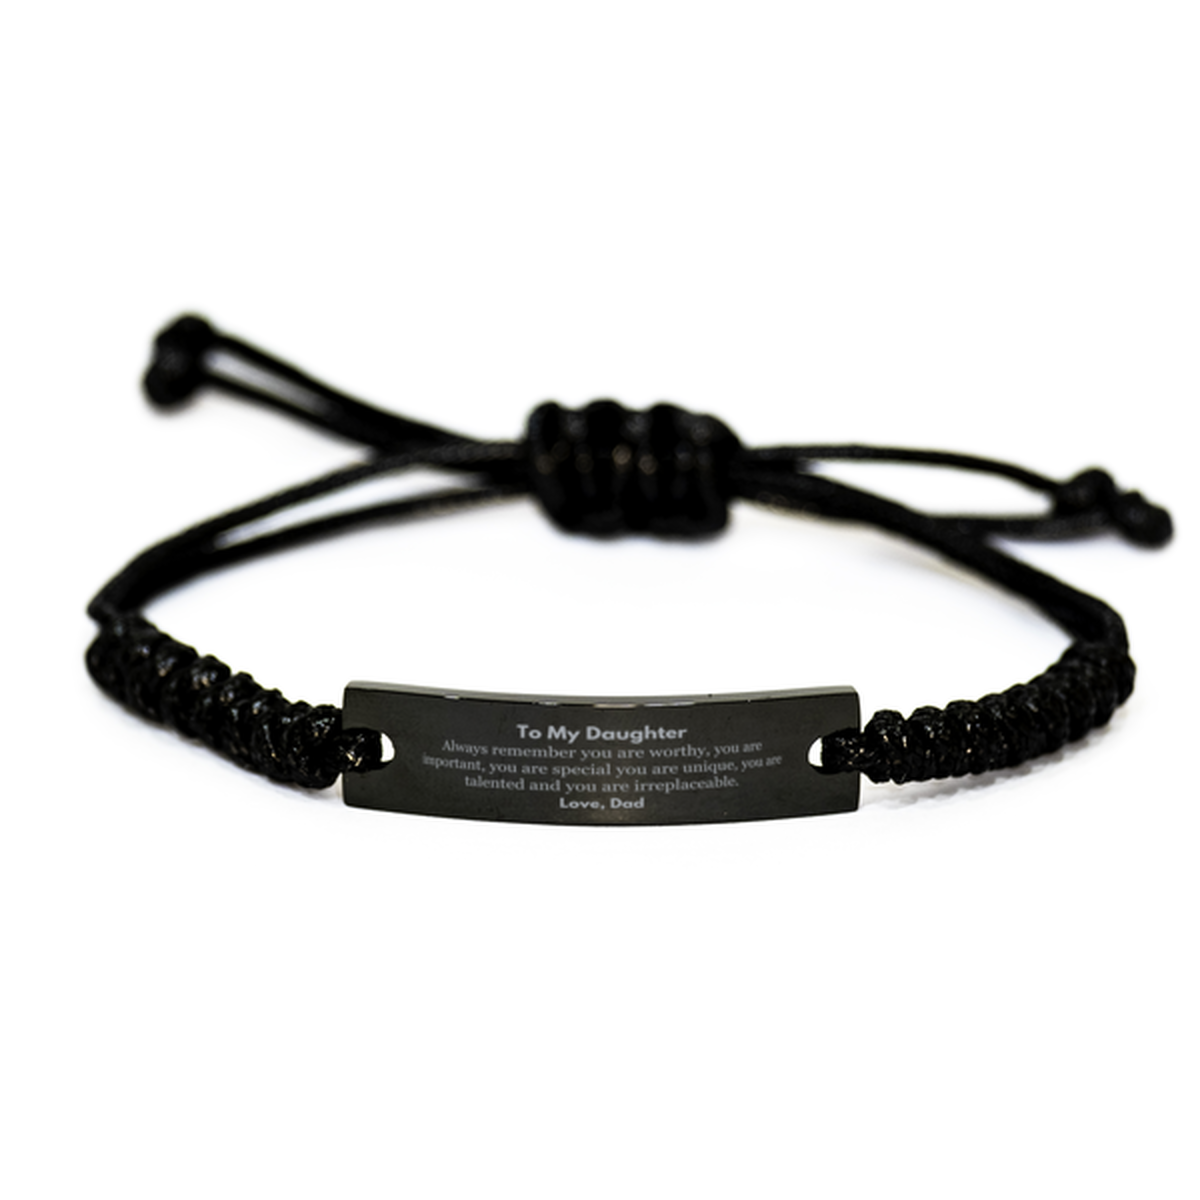 Daughter Birthday Gifts from Dad, Inspirational Black Rope Bracelet for Daughter Christmas Graduation Gifts for Daughter Always remember you are worthy, you are important. Love, Dad